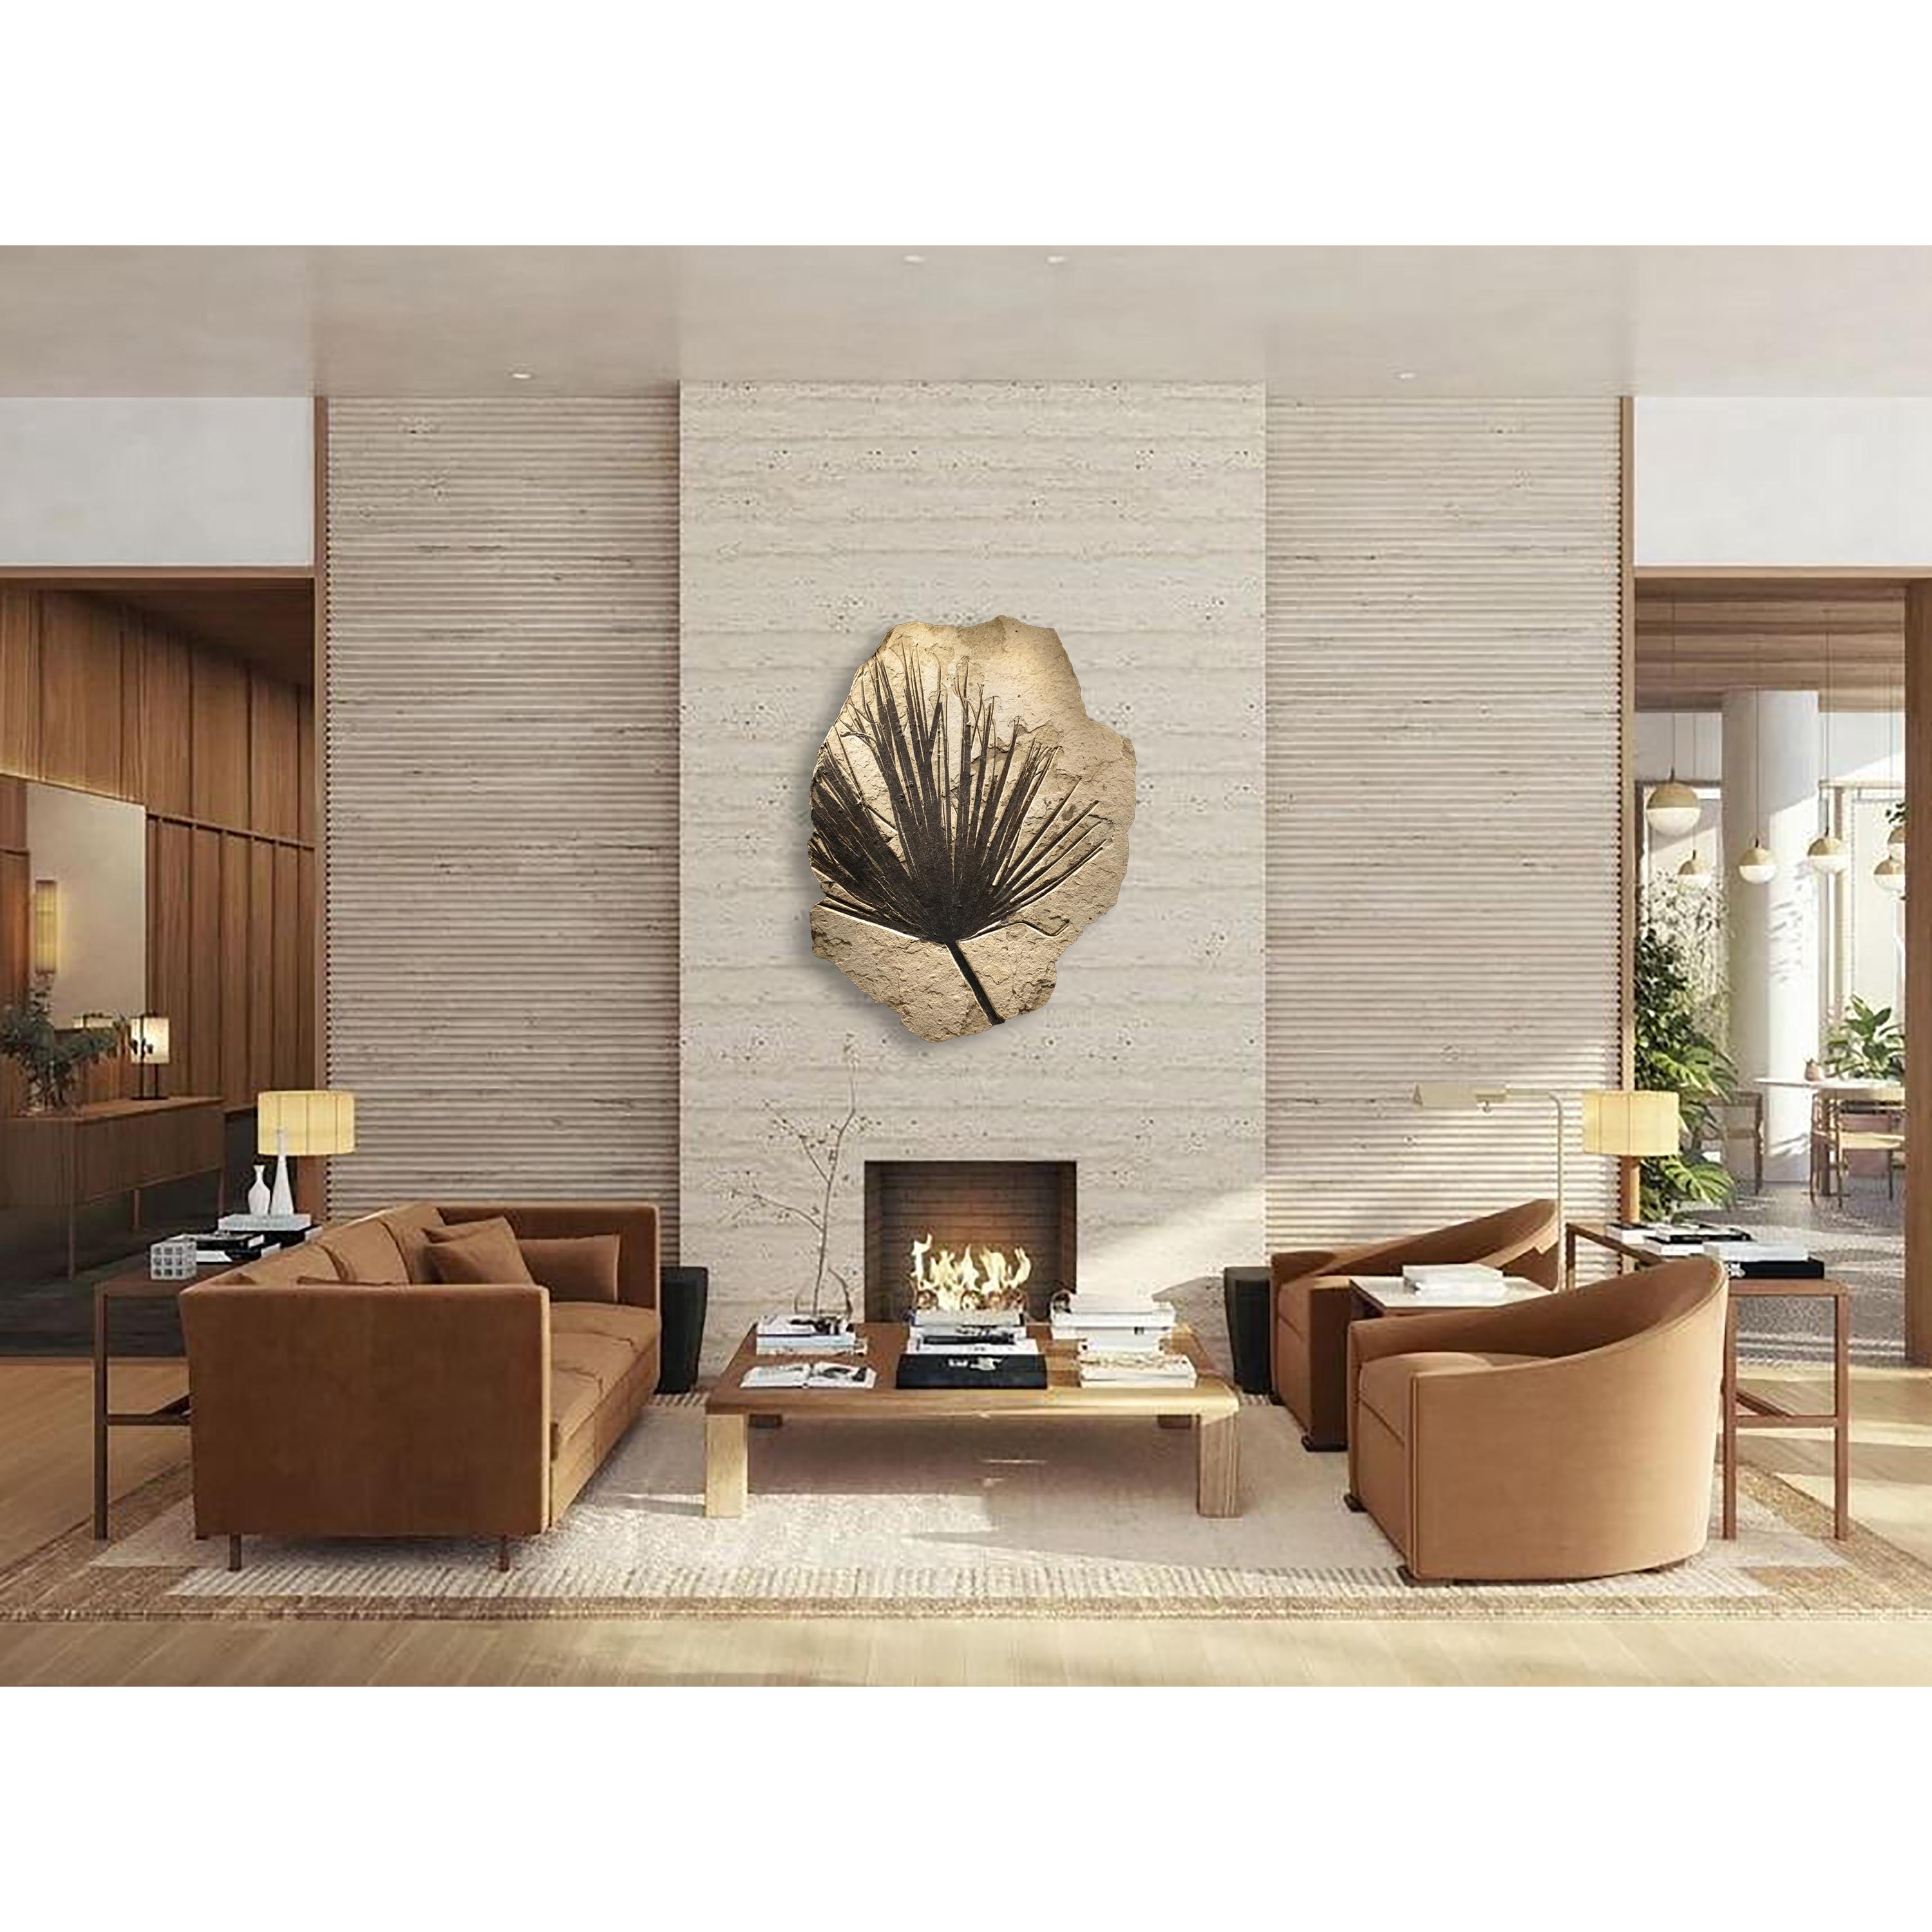 This mural features a beautiful fossilized palm frond which is an Eocene era fossil dating back about 50 million years. Plant life often produces some of the most aesthetic Green River Formation fossils we have prepared over the years. Due to the